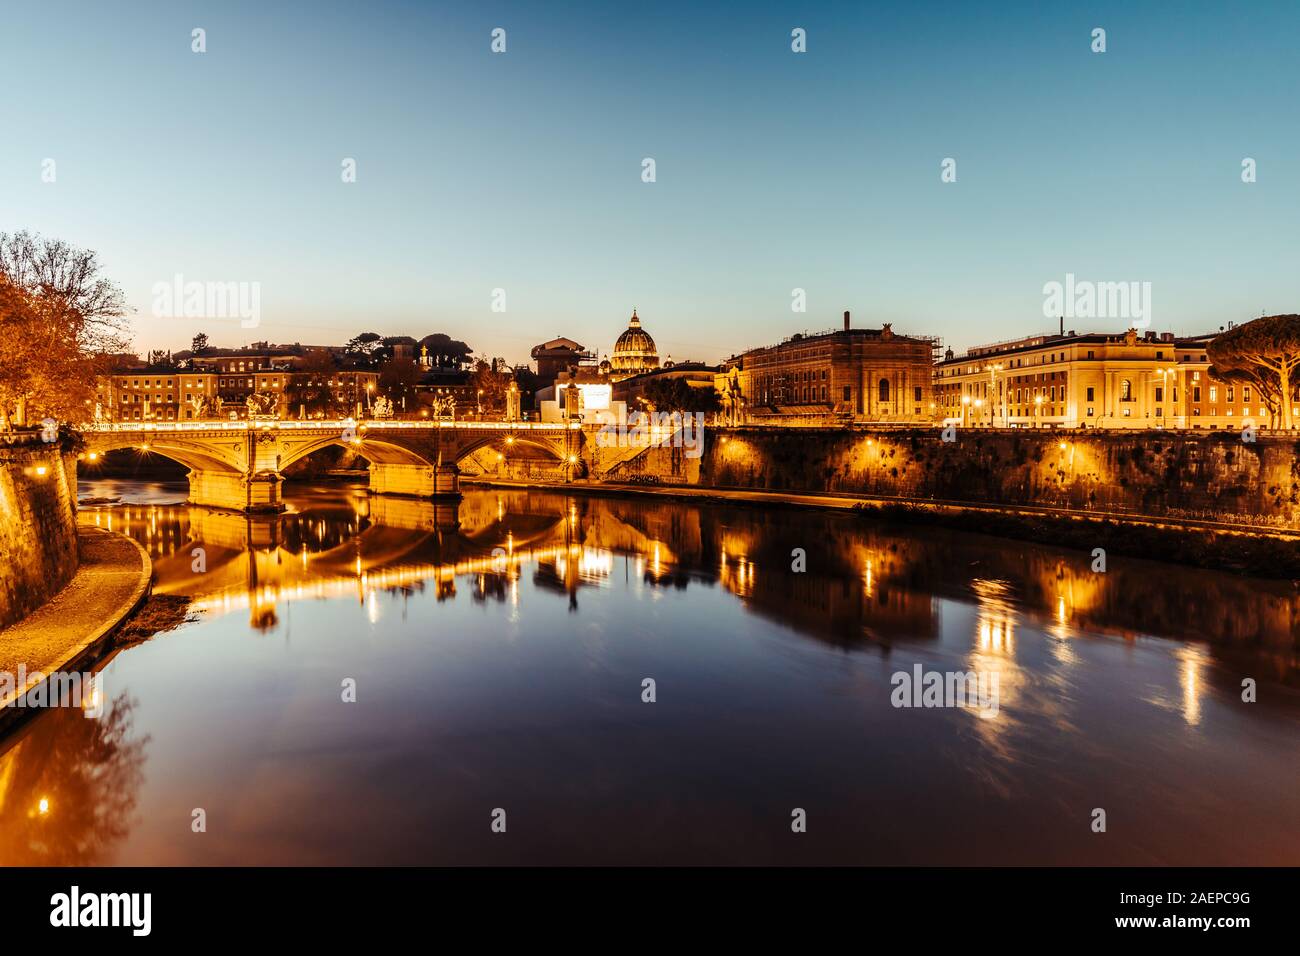 St Peters basilica and river Tibra at night in Rome, Italy Stock Photo